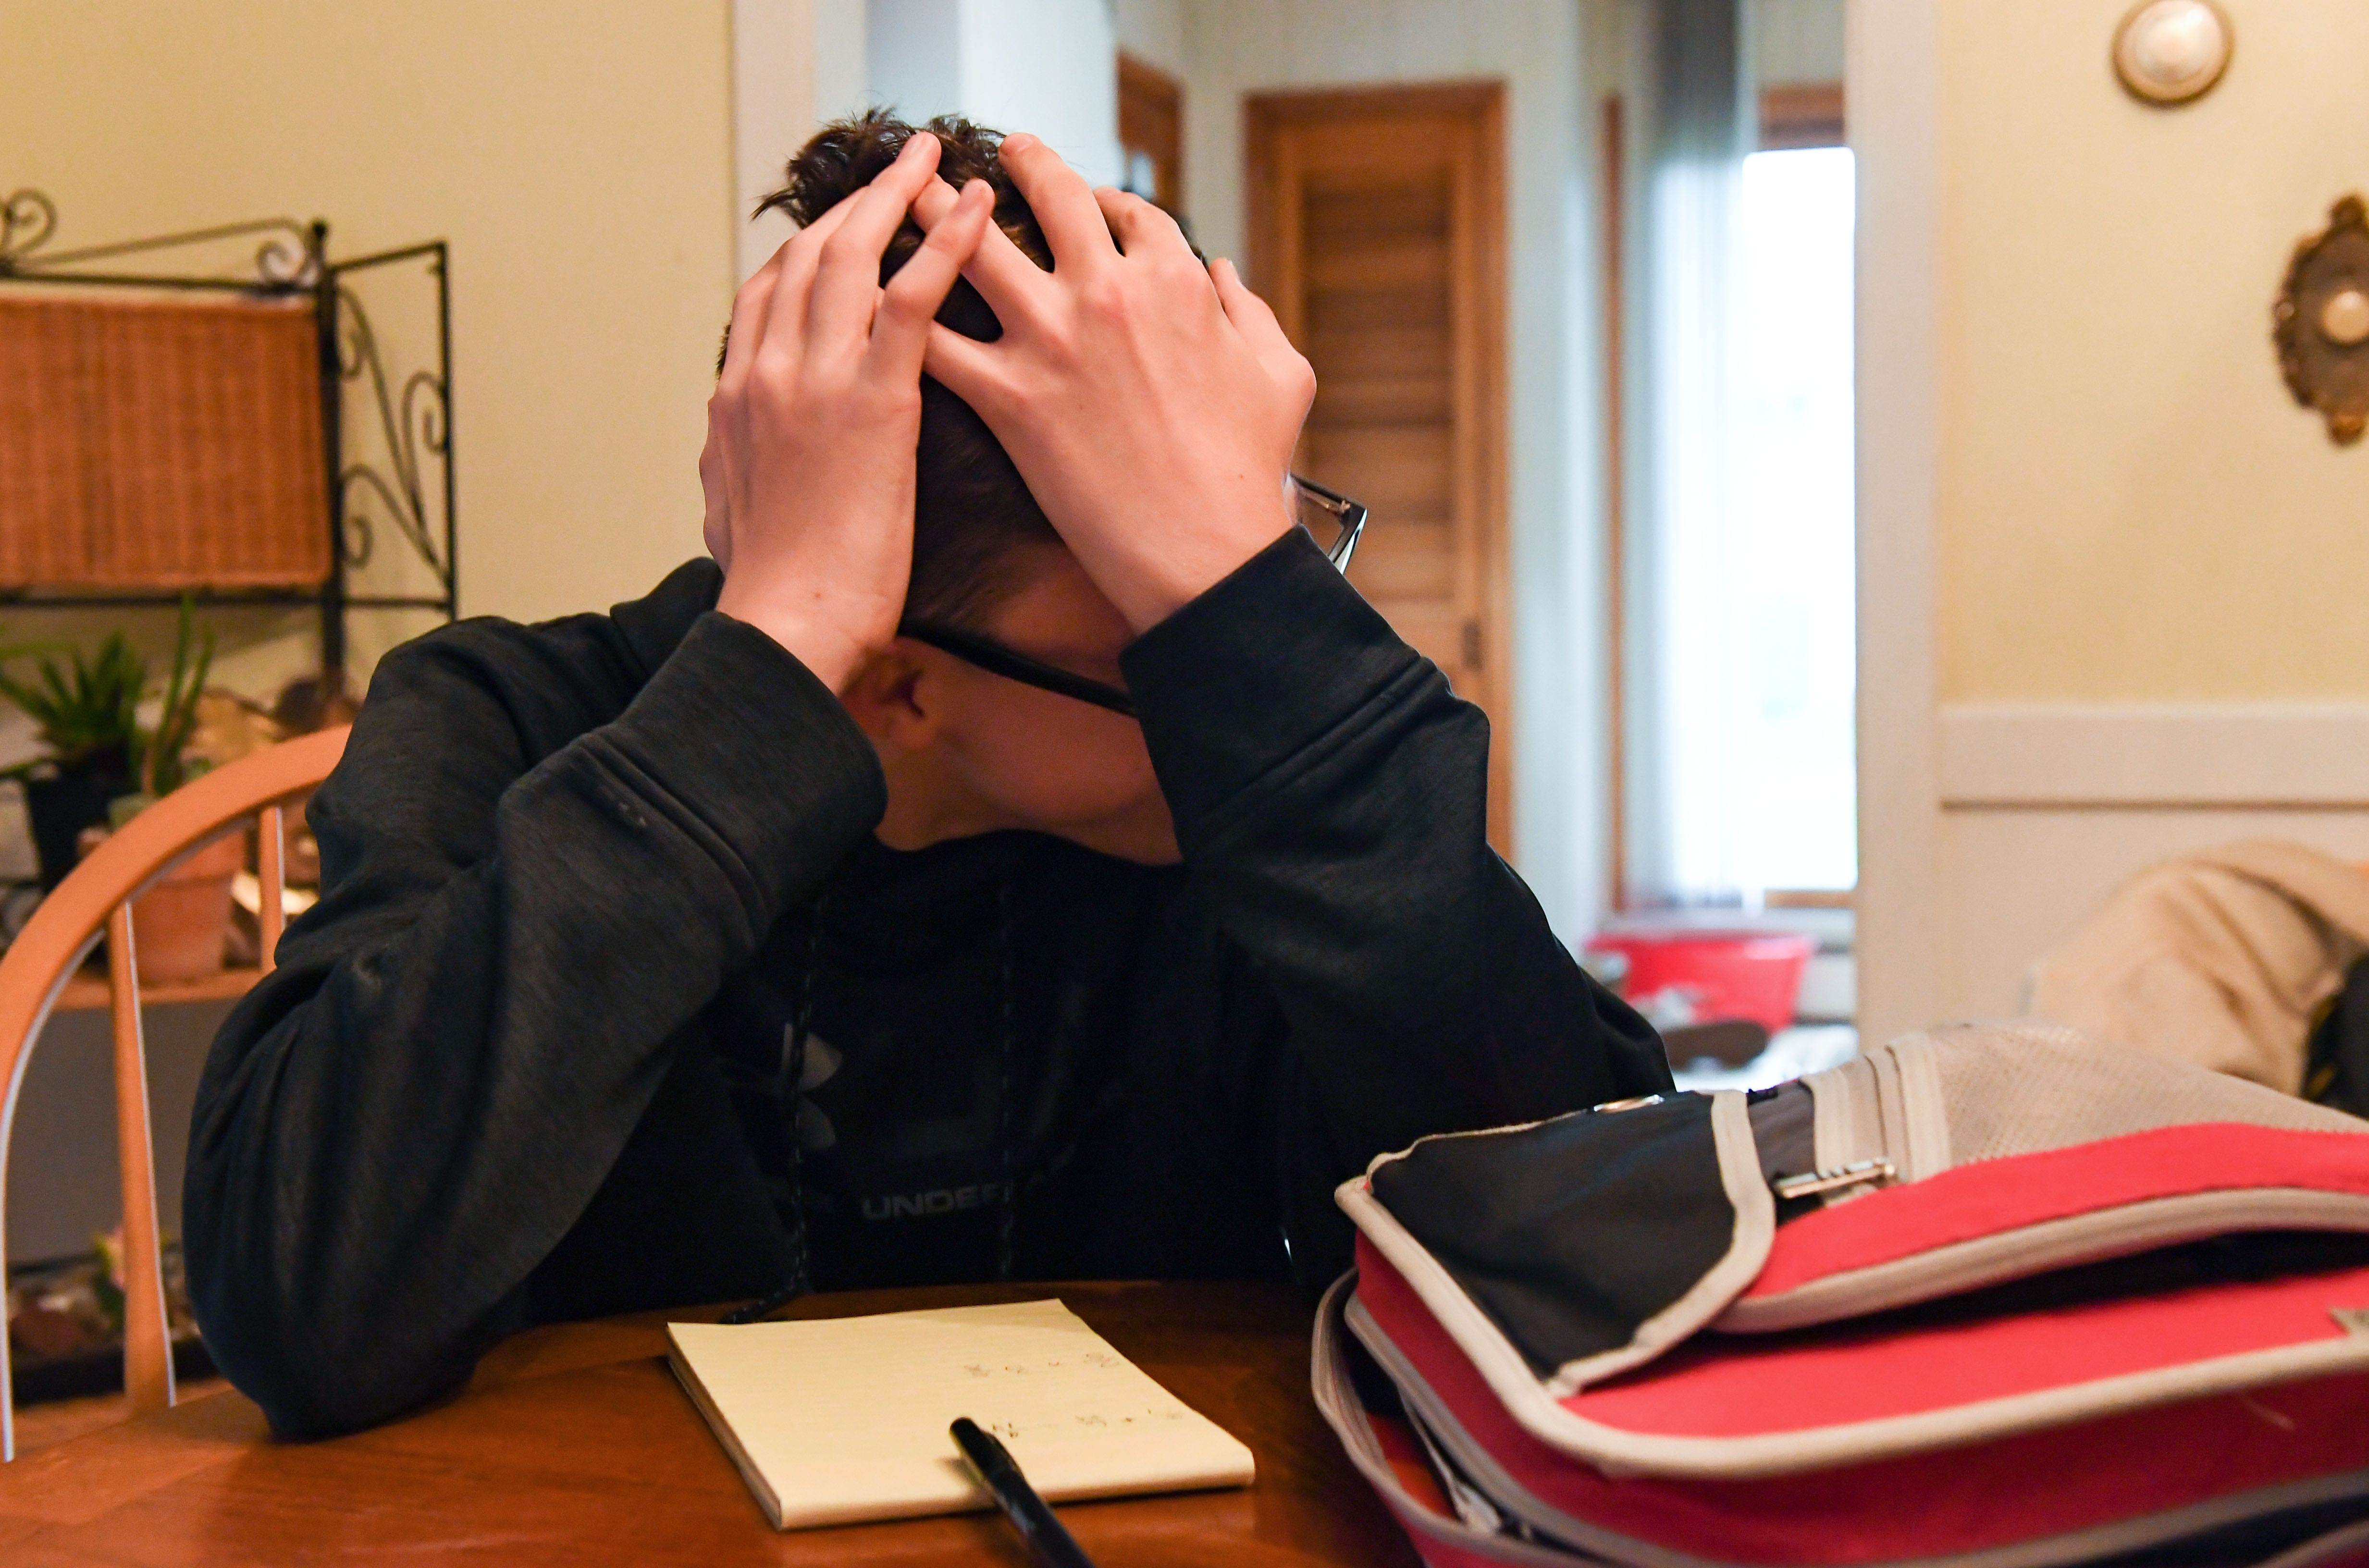 "You don't know how hard it is for me to understand things," Trey Diedrich told his mom about why he was avoiding a frustrating homework problem.